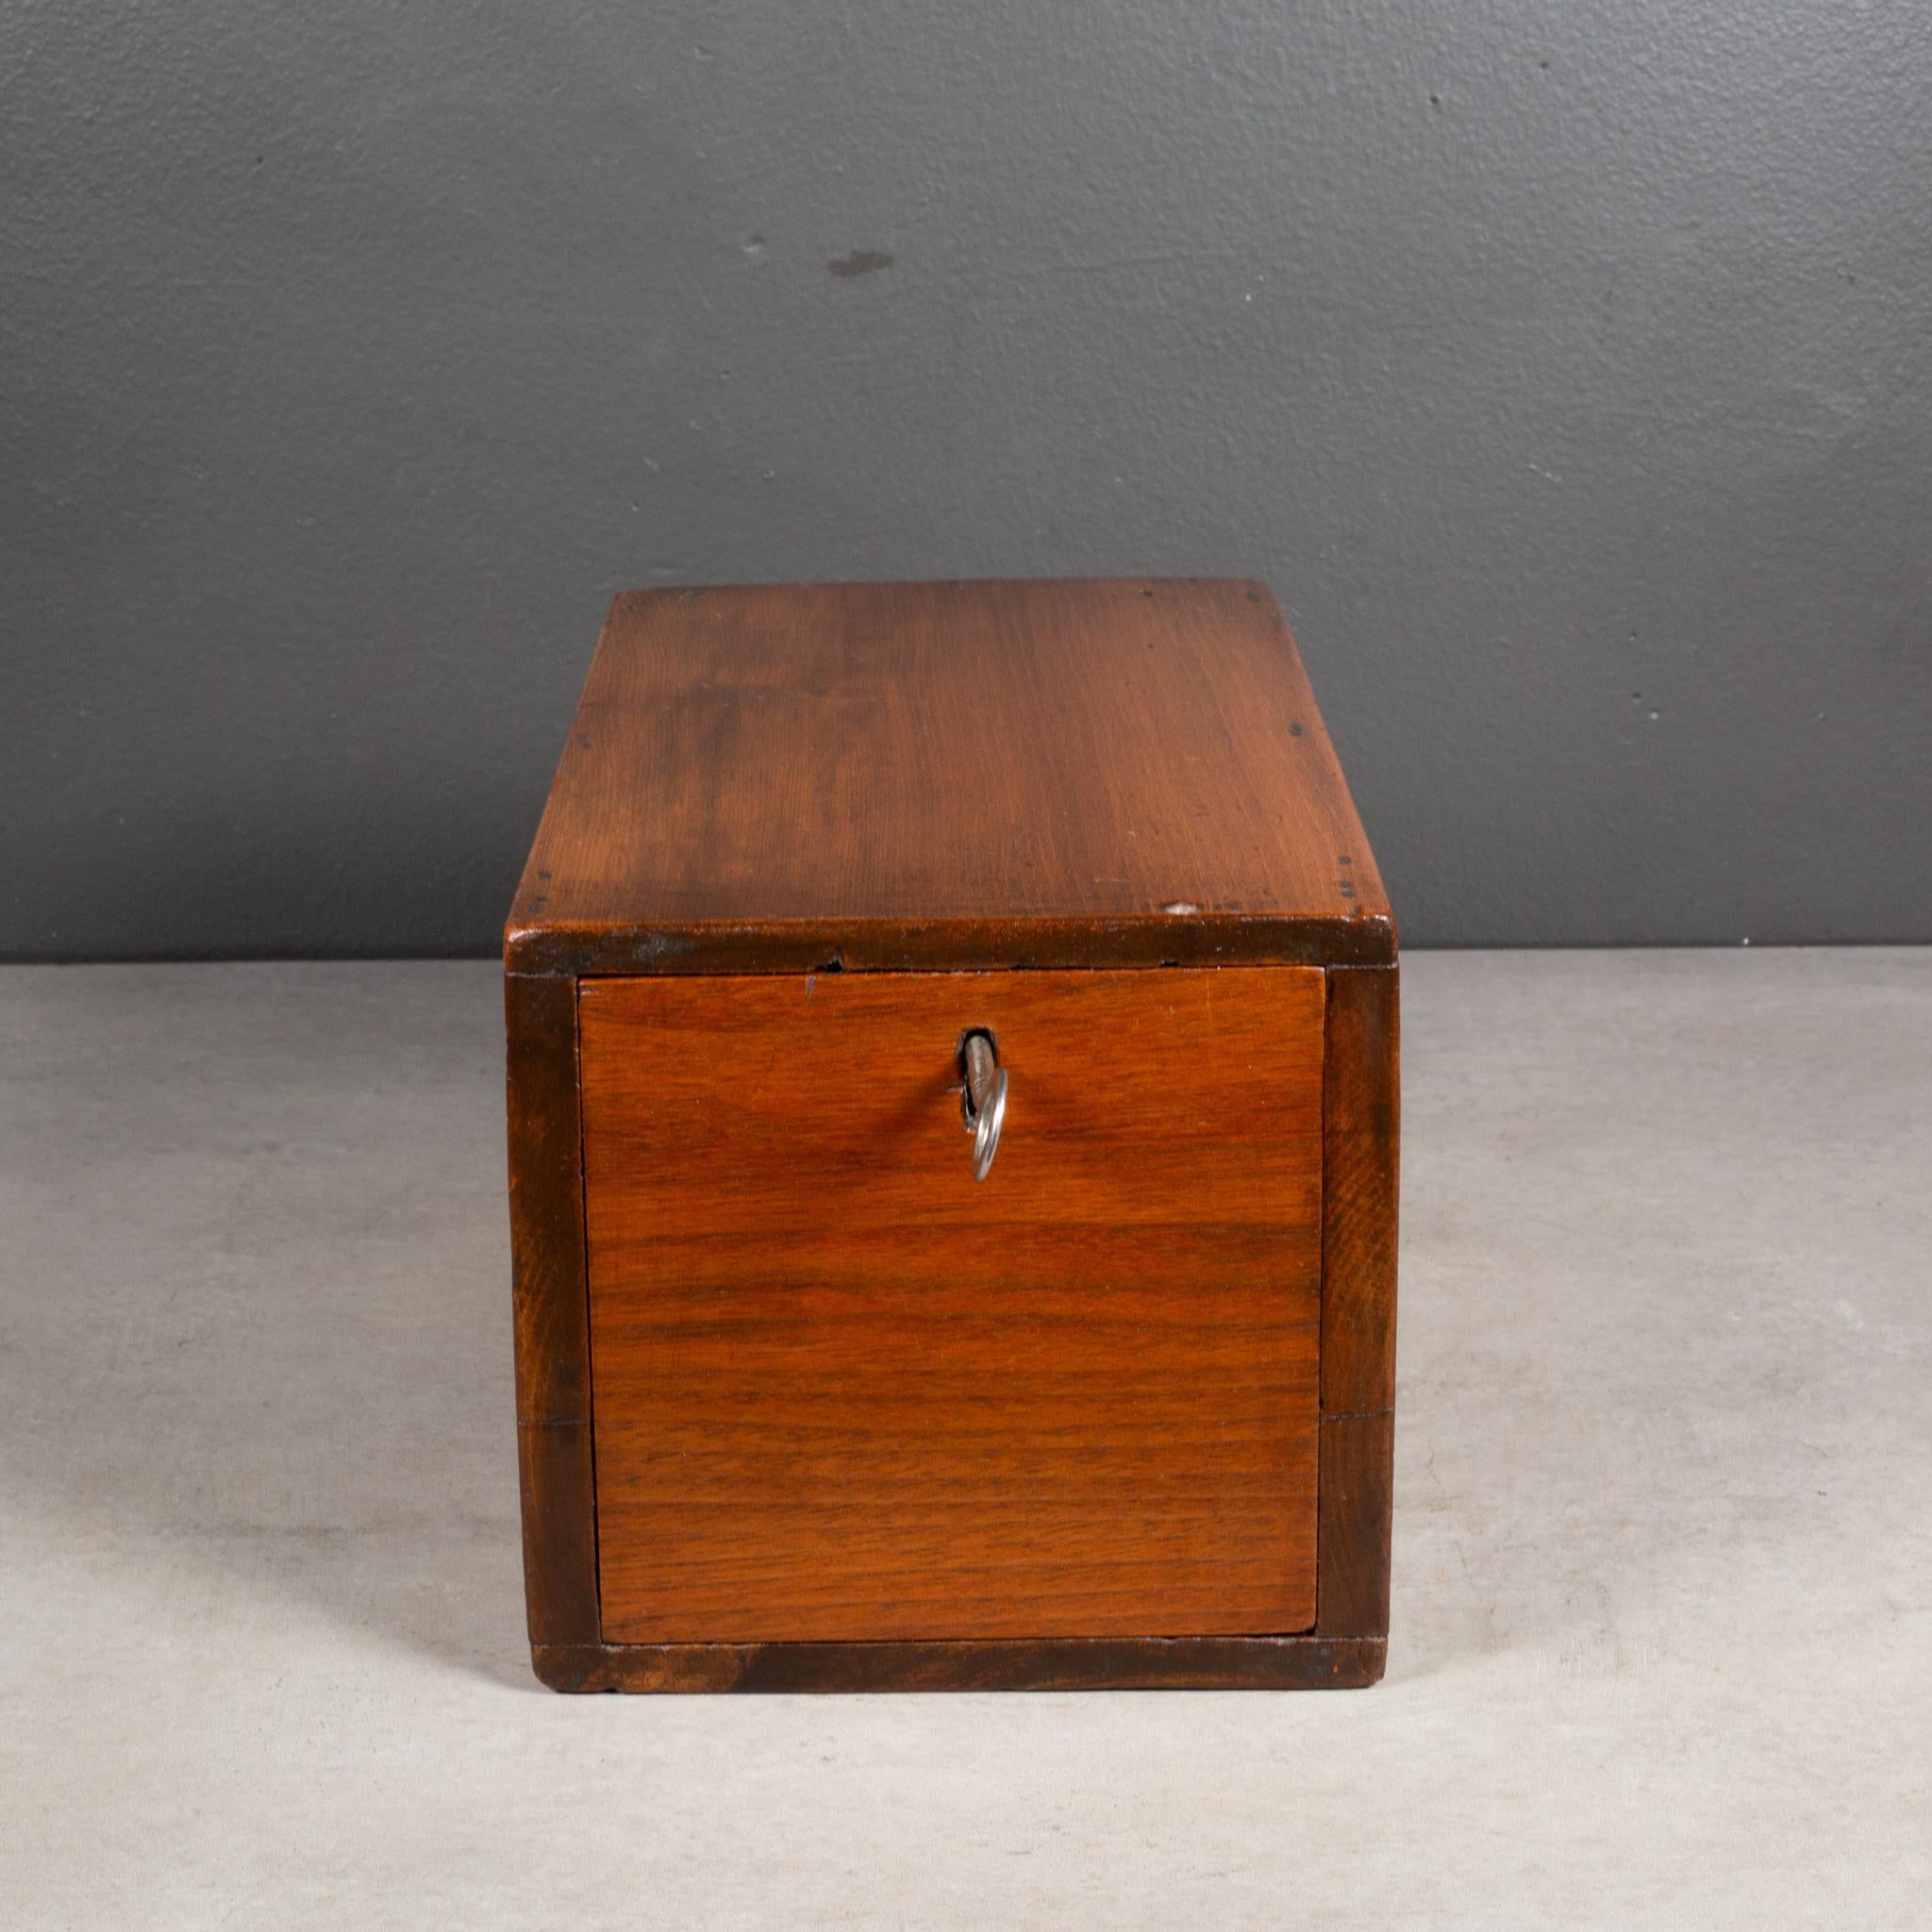 19th Century Signed Mid-19th c. Wooden Lock Box c.1863 For Sale